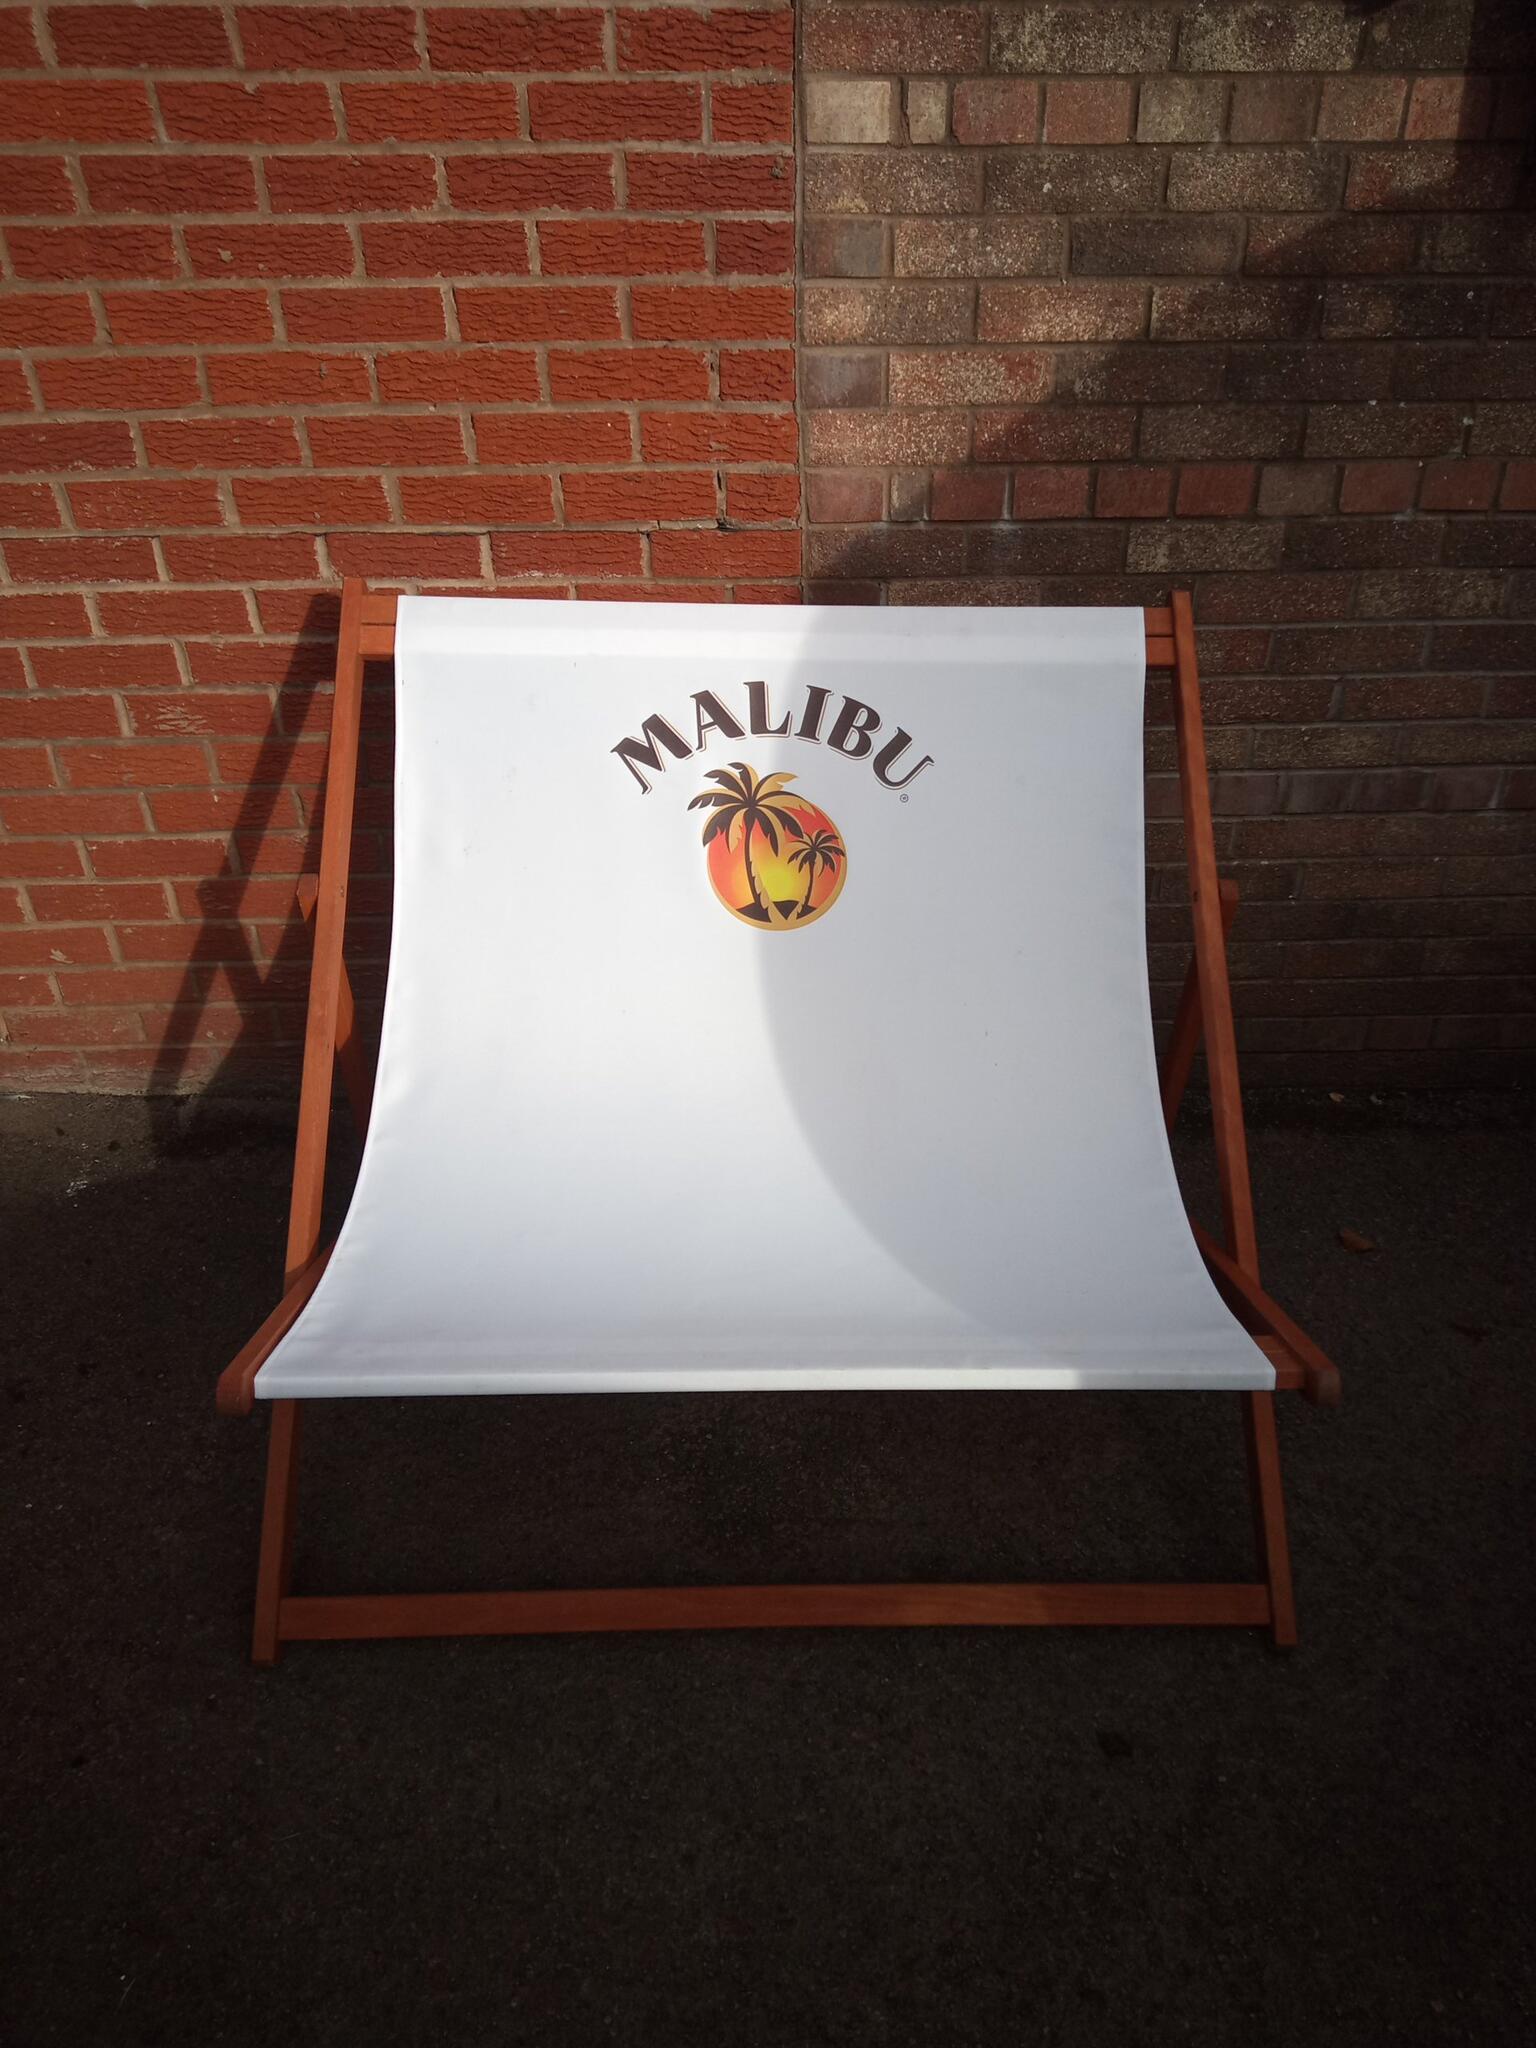 Wooden Deckchair. For £40 In Hereford, Engl For Sale  Free — Nextdoor